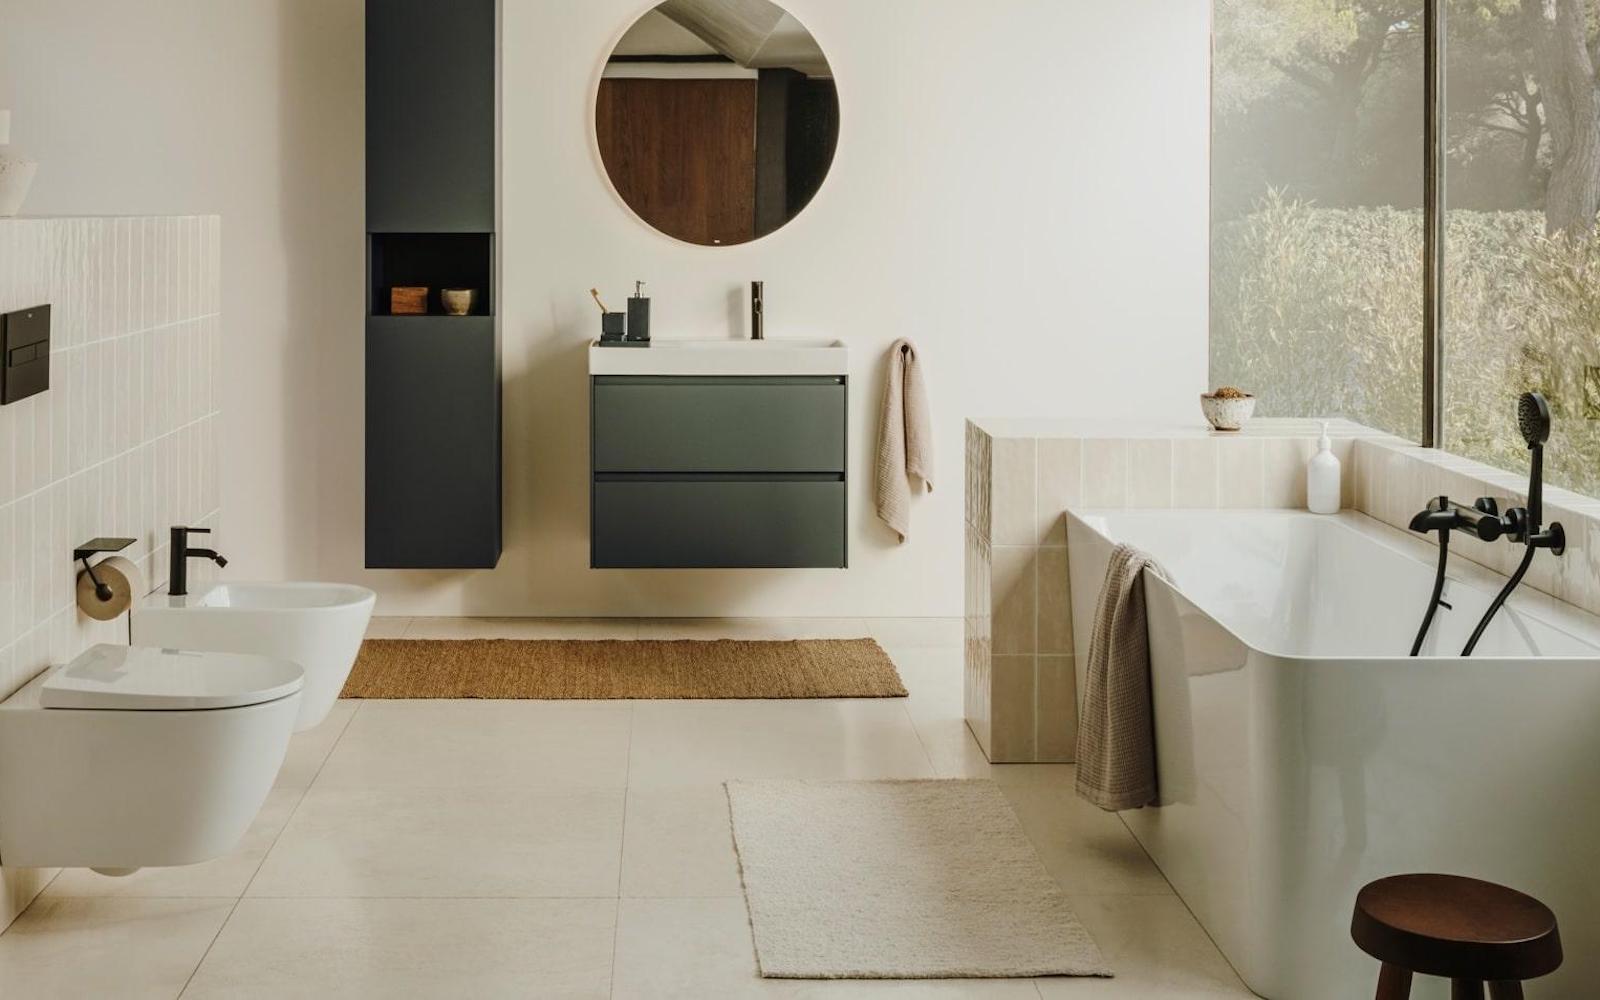 One collection in modern bathroom